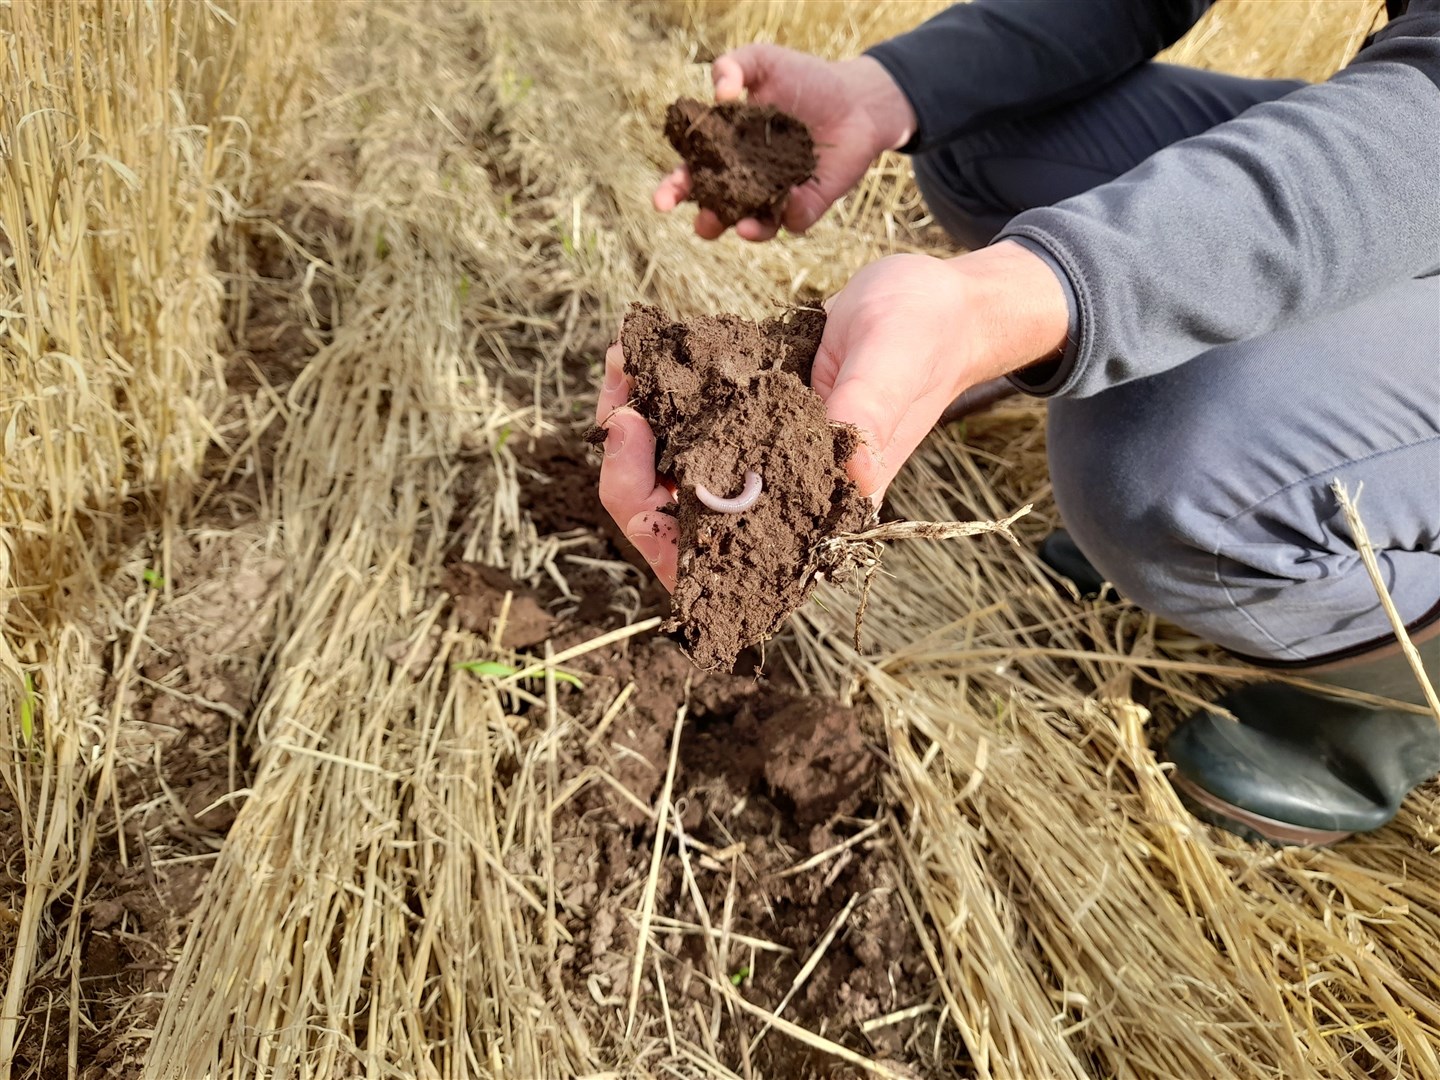 All five farmers agreed that focusing on good crop rotations was key to improving soil health and managing grass weeds